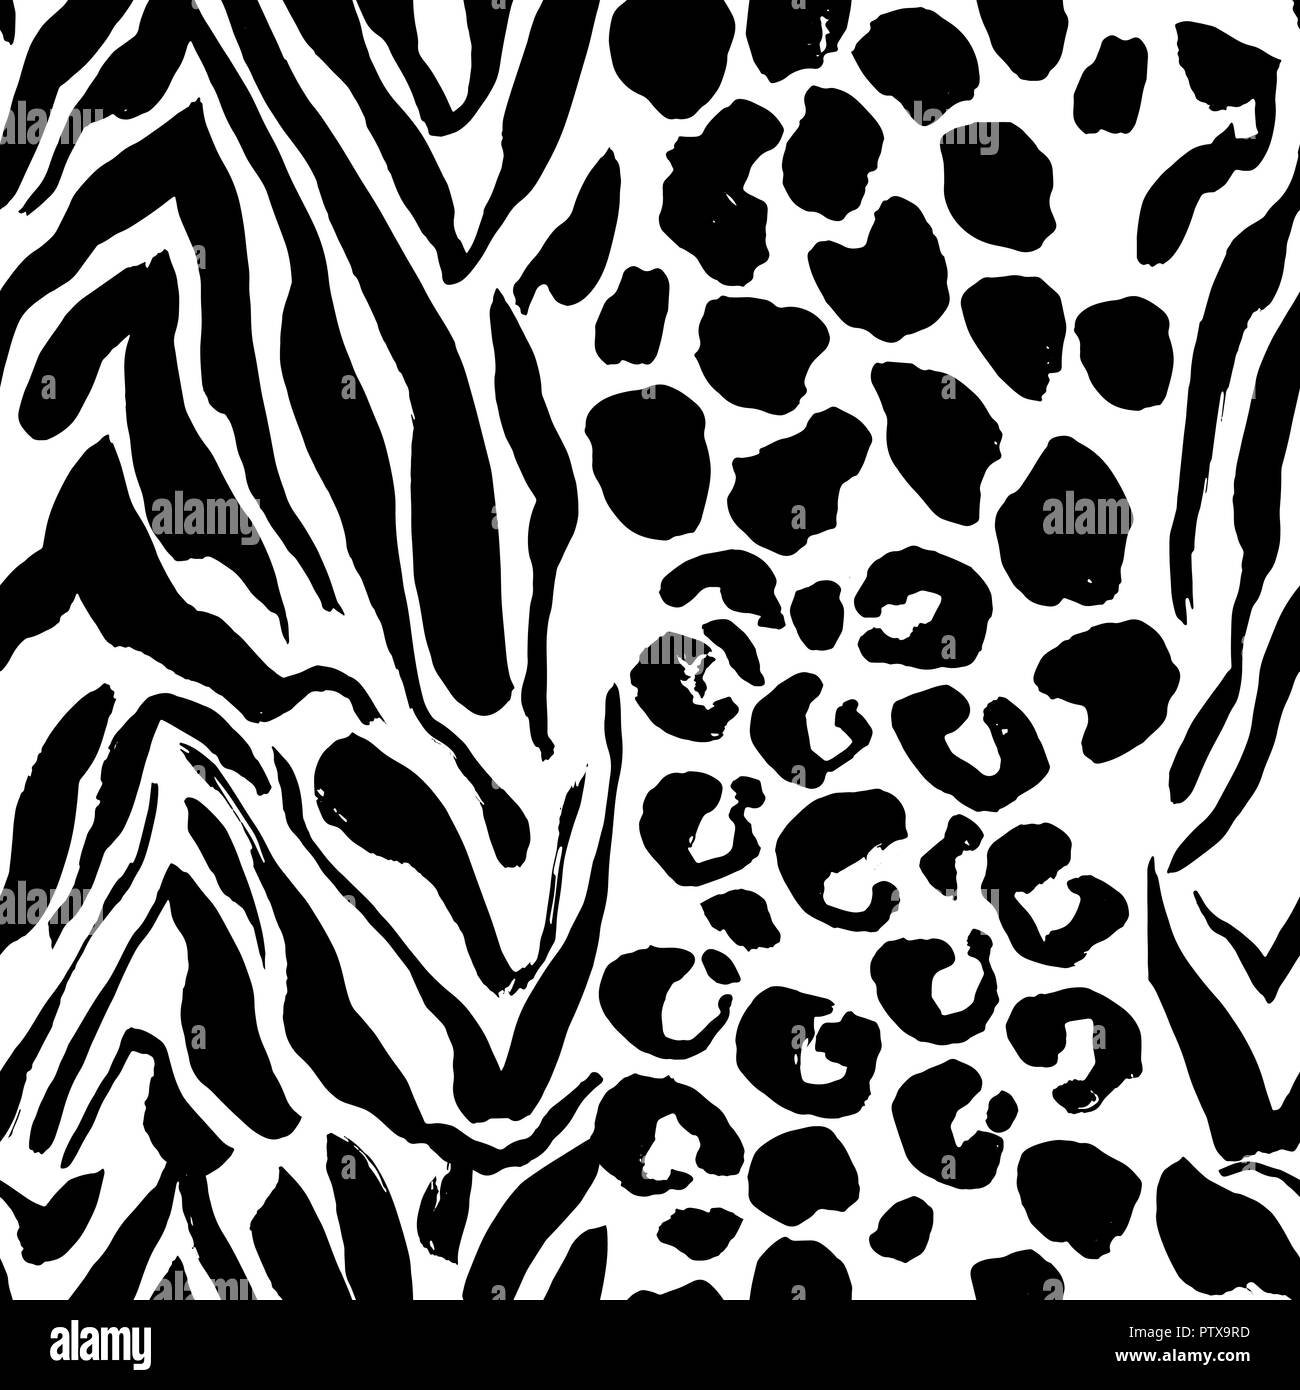 Brush painted tiger seamless pattern. Black and white leopard stripes grunge background. Stock Vector